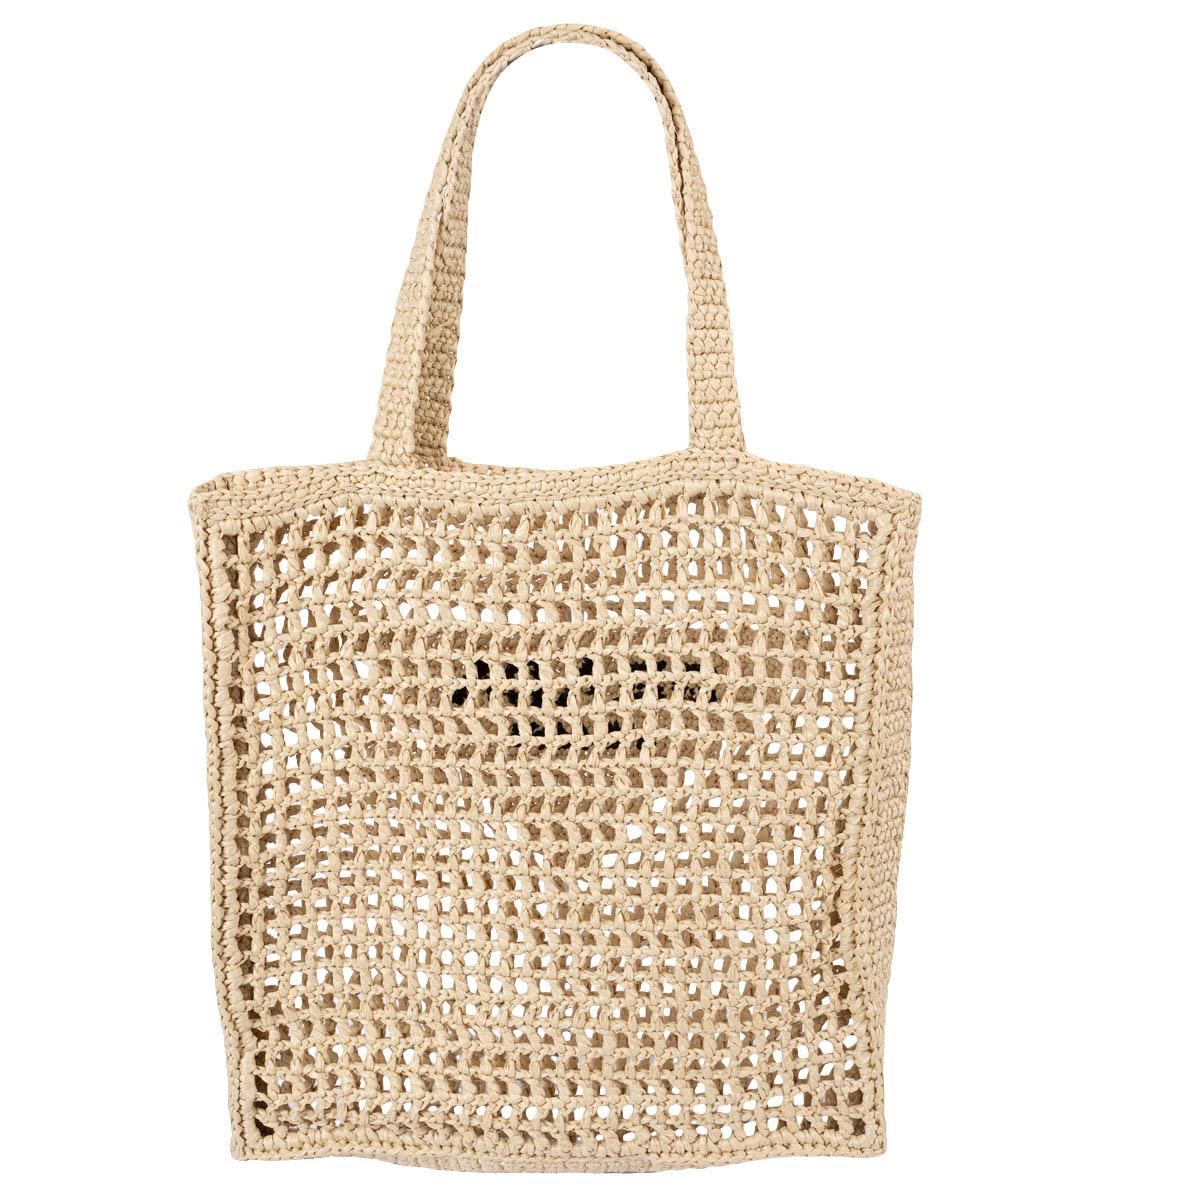 100% authentic Prada tote bag in beige raffia-effect yarn. A new interpretation of Prada's emblematic triangle decorates the front and is embellished at its center with the embroidered lettering logo. Unlined. Brand new.